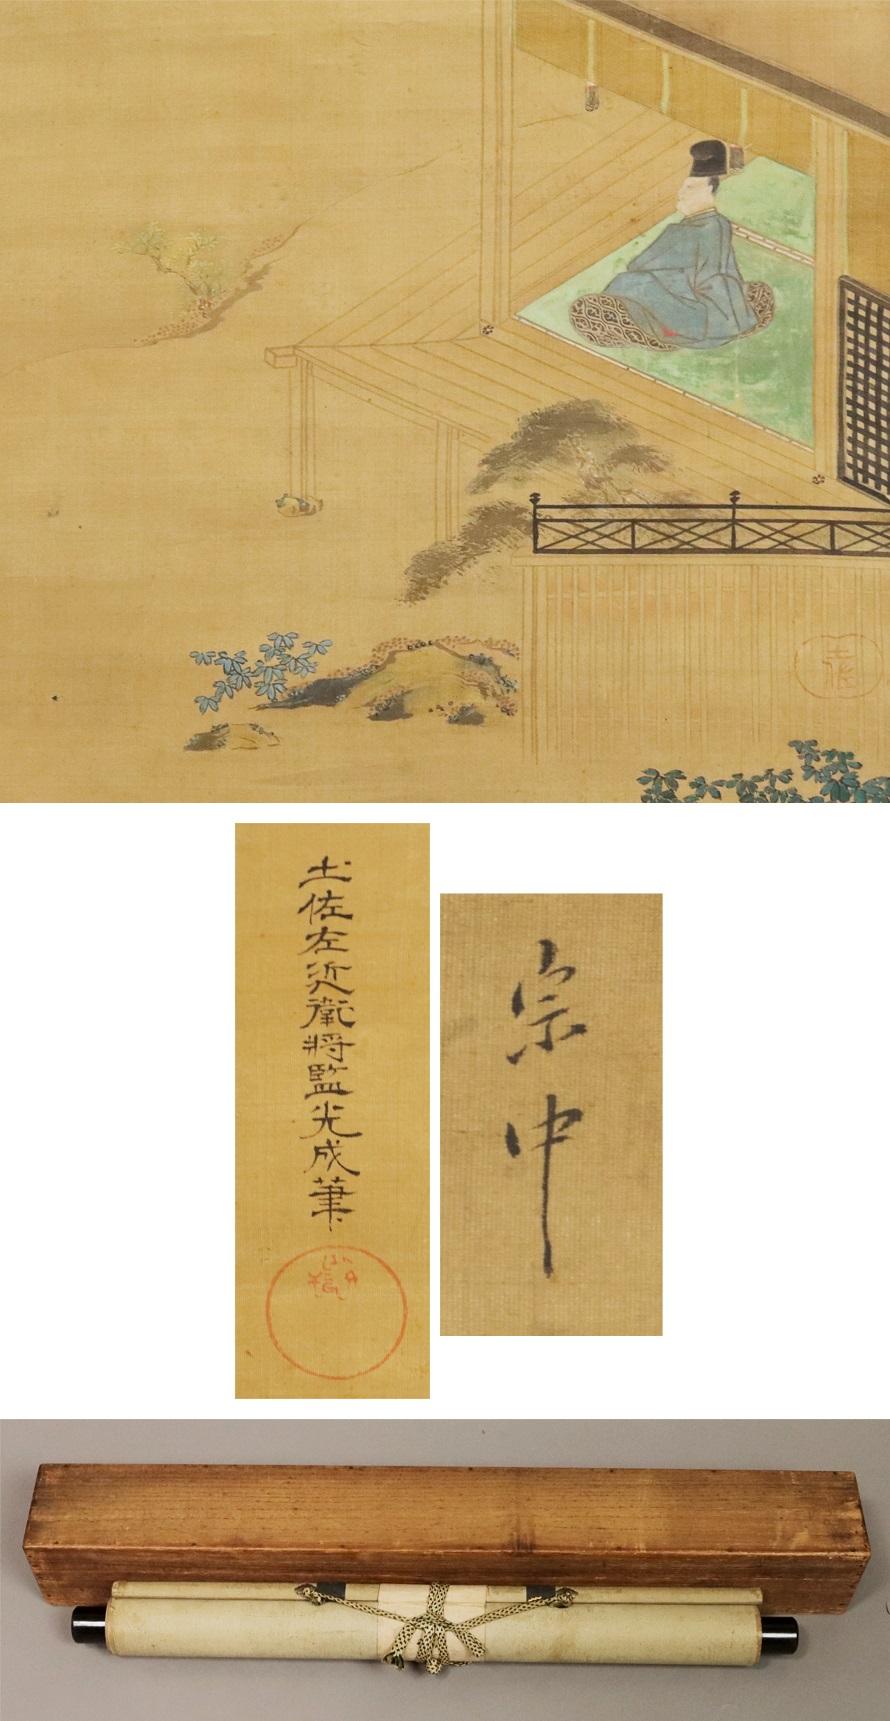 Around the middle of the Edo period, say to have been drawn in Tosa Mitsunari of the hands of the Tosa School,
the Heian period of person (noble?) Is watching the birds fly the garden, it is drawn flavor full of work are Read the song. (A praise